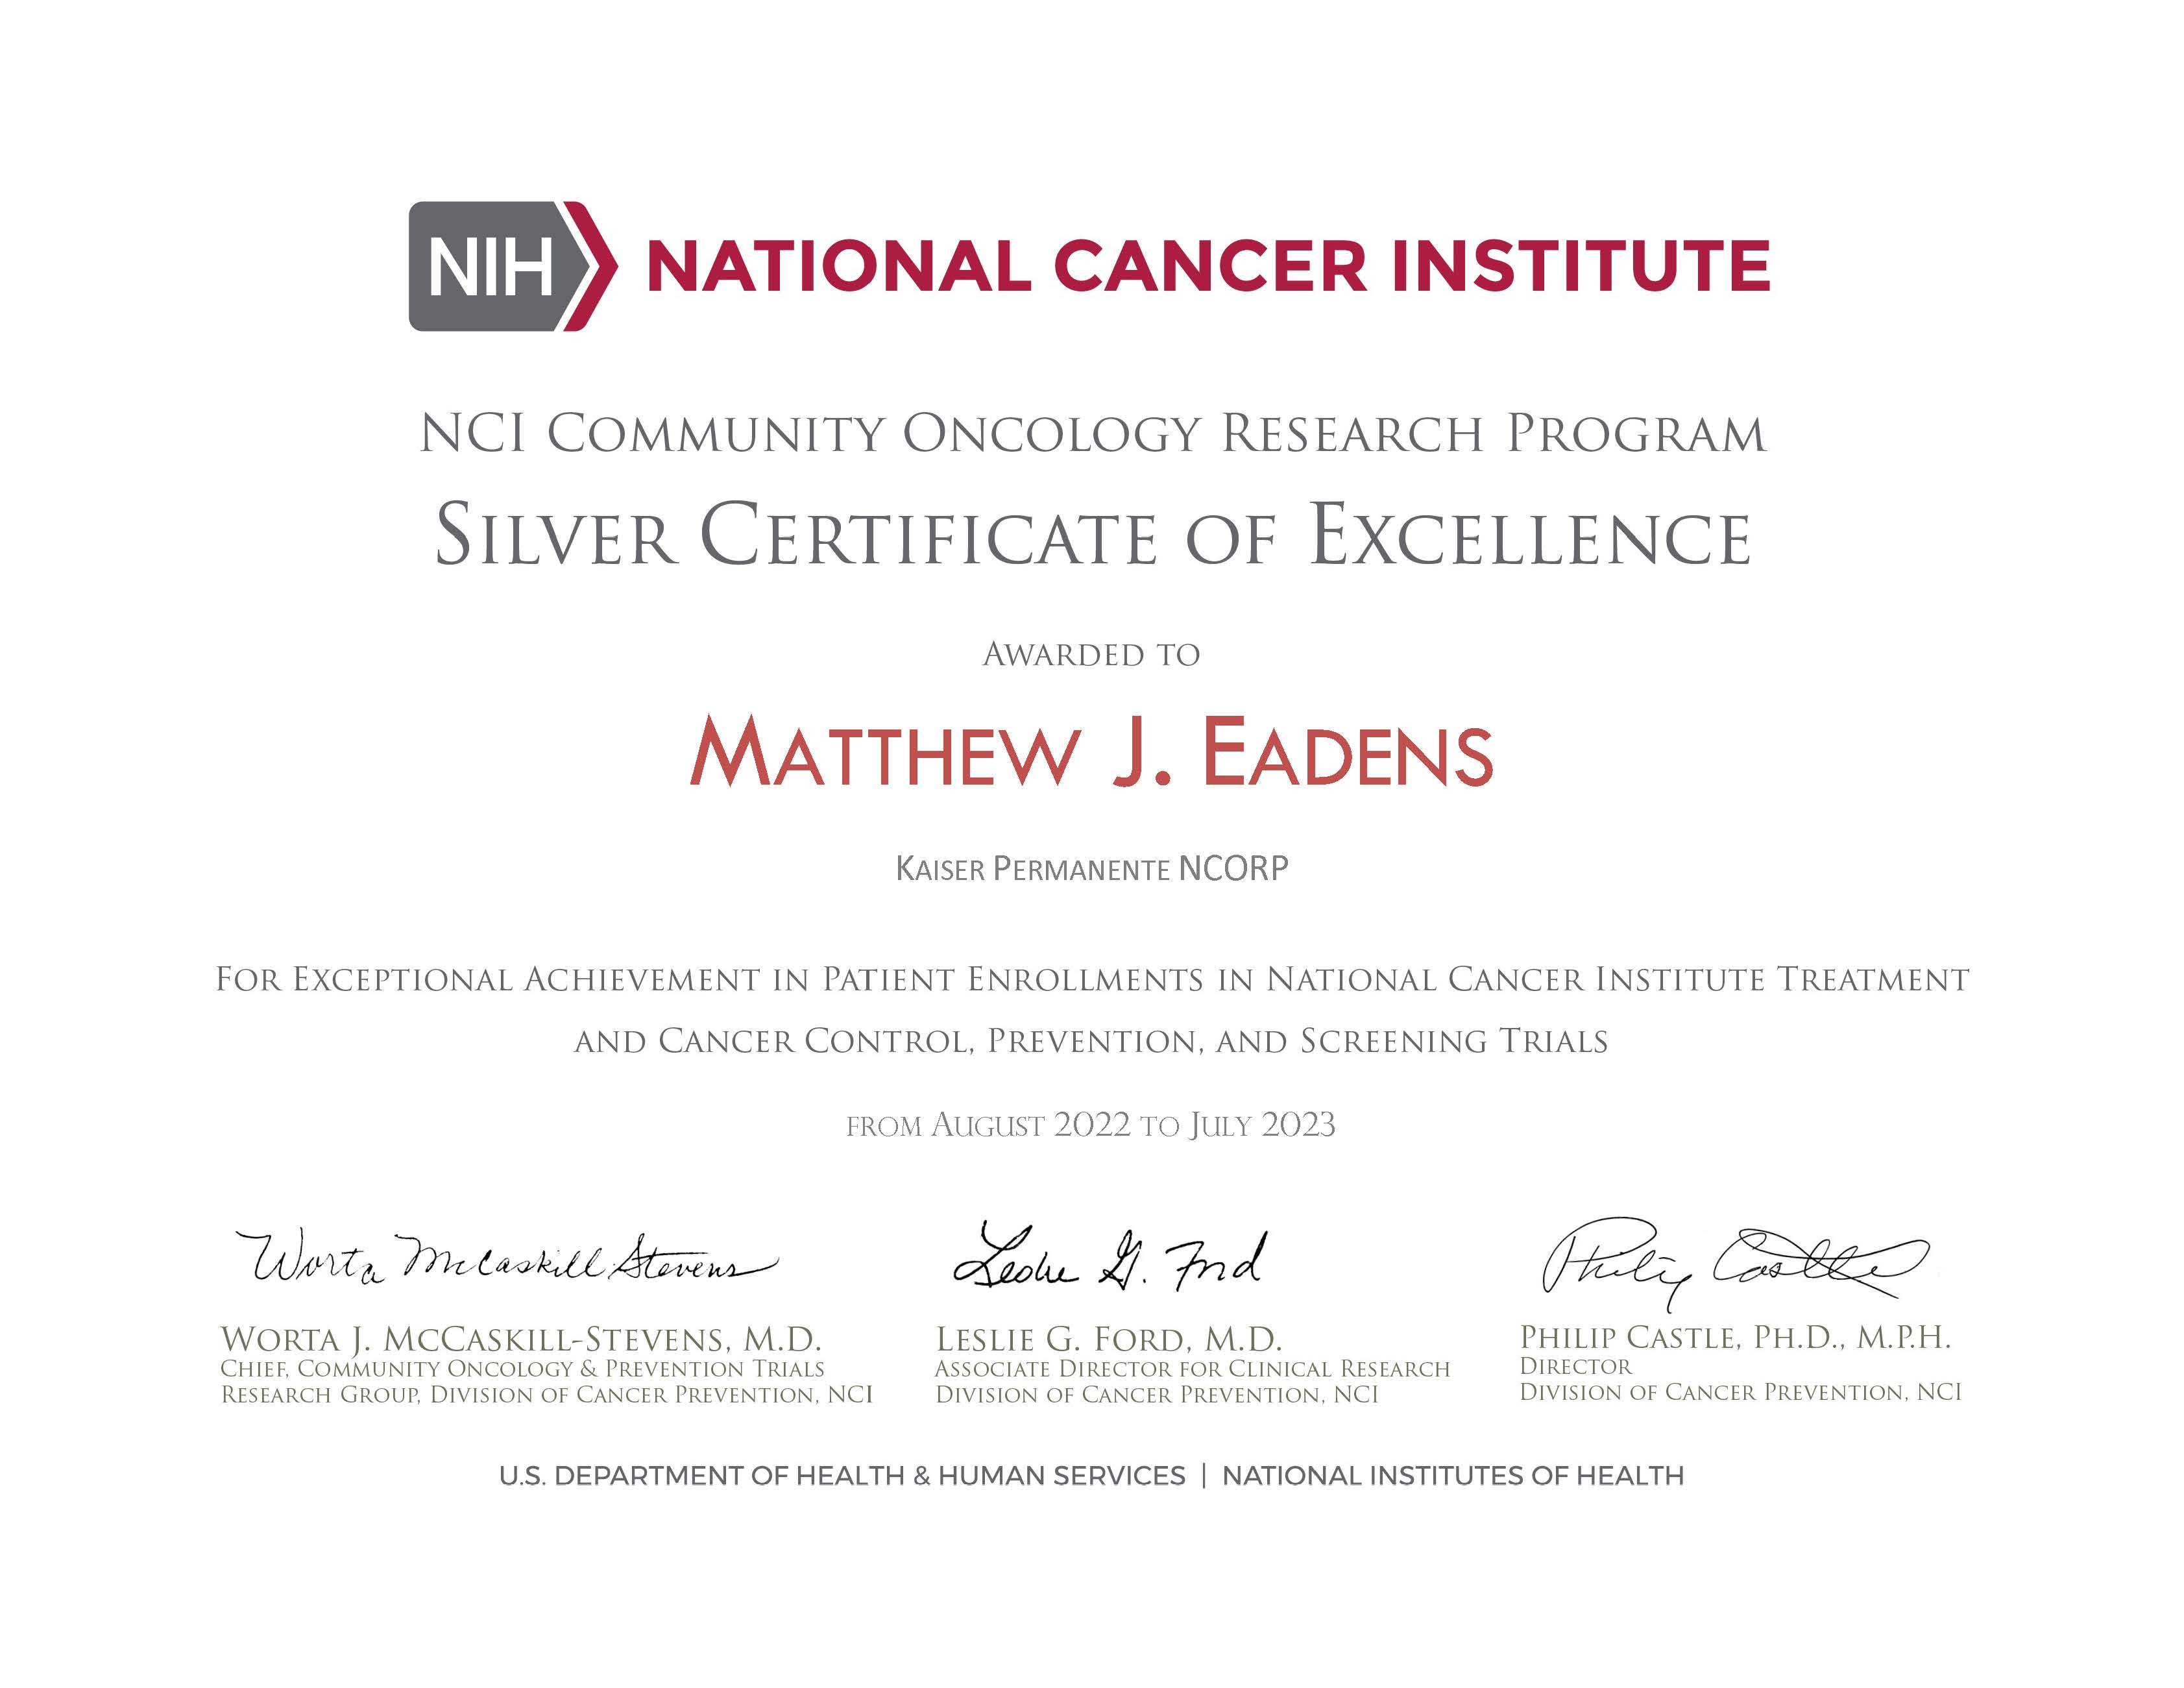 Image of Dr. Eadens's Silver Certificate of Excellence for their exceptional achievement in clinical trial participation.